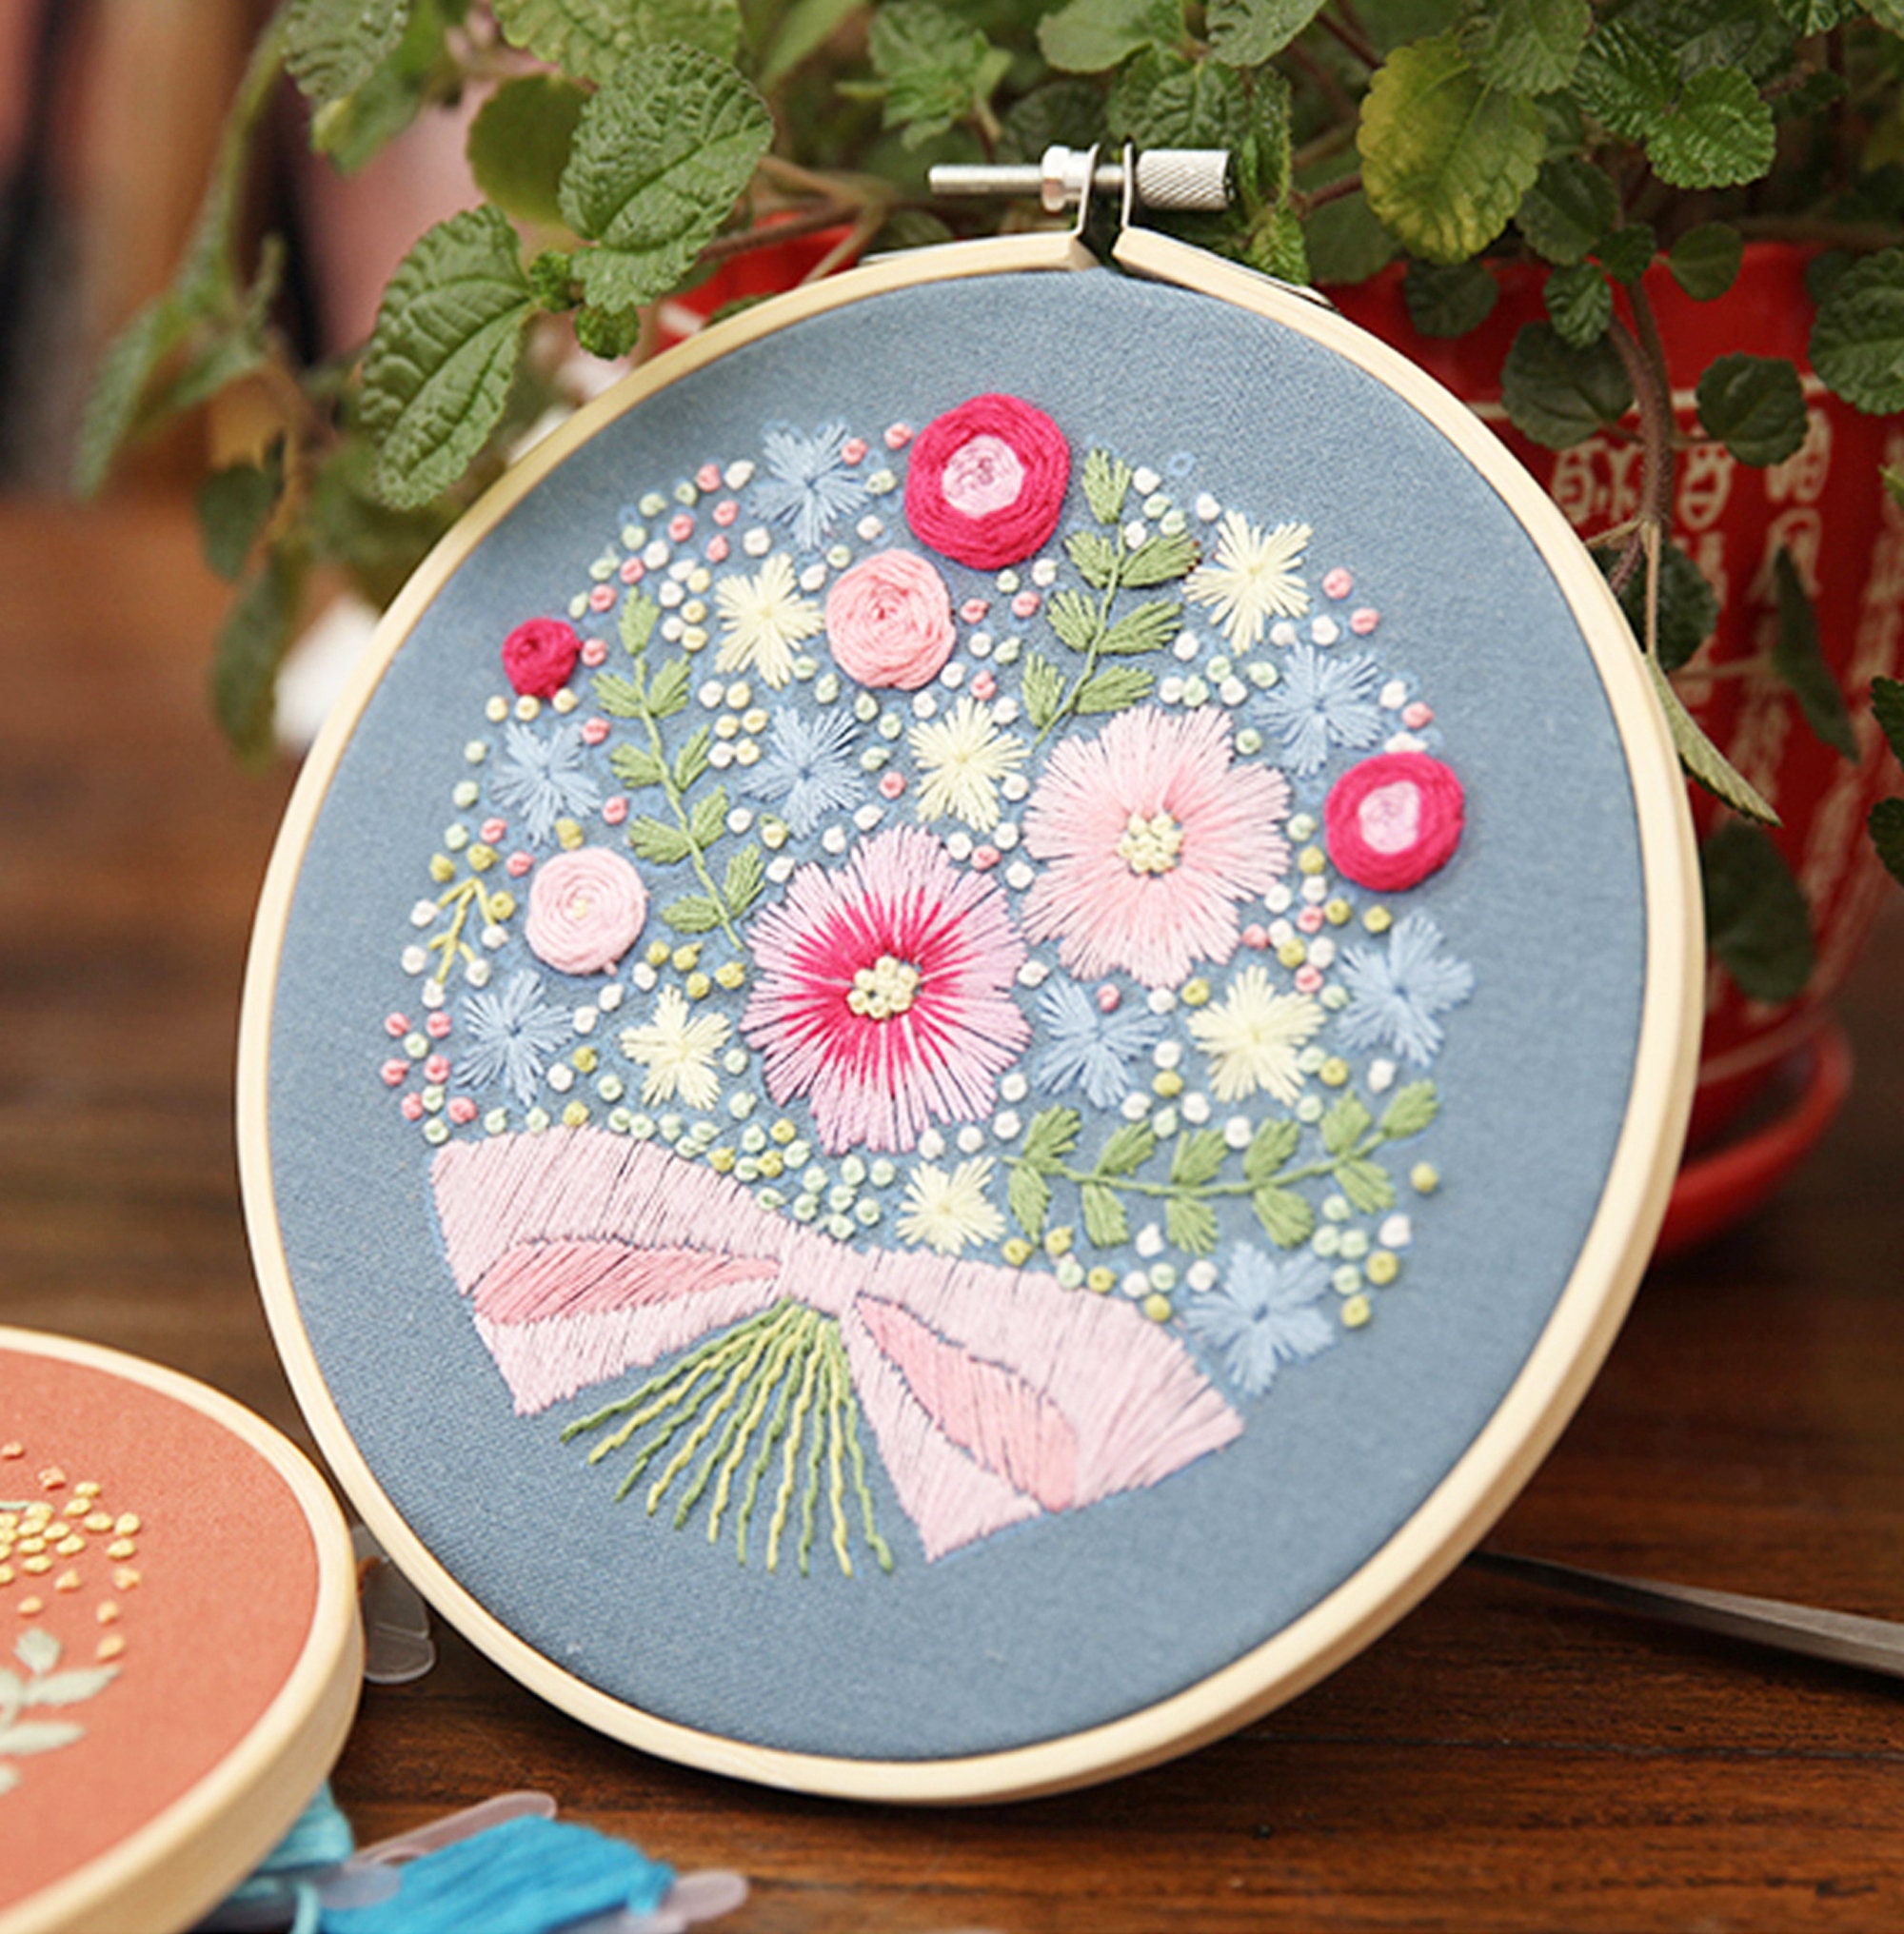 Blingpainting Floral Embroidery Kit for Beginners,Plant Pattern